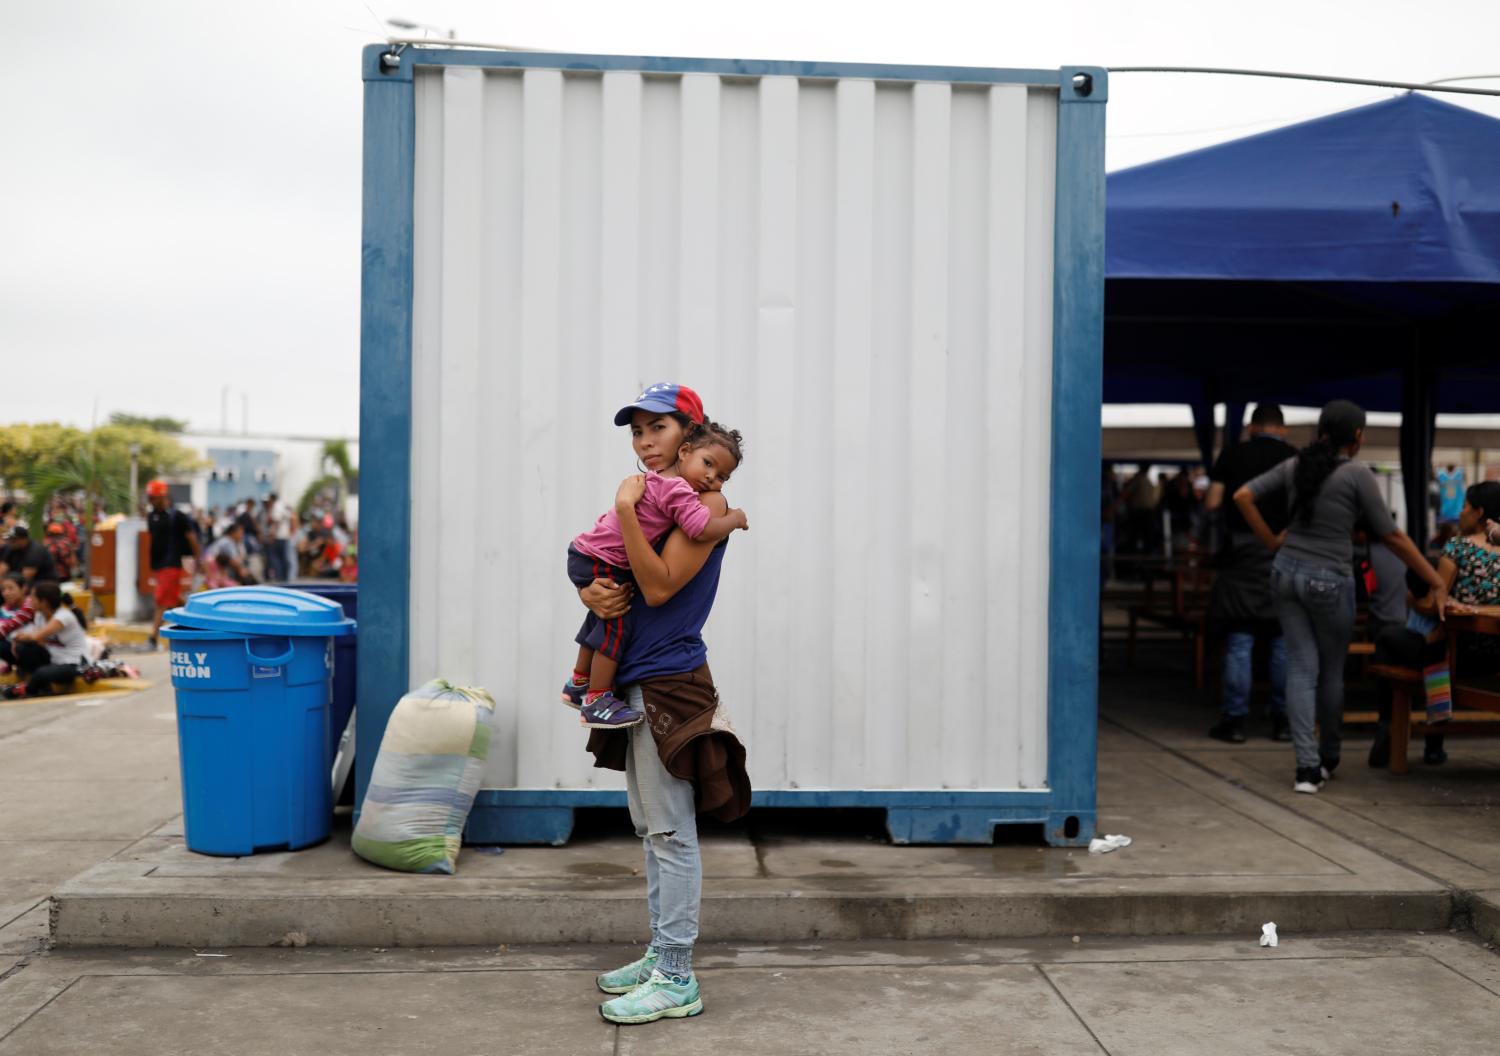 Venezuelan migrant Andraimi Laya, 22, poses for a picture carrying her daughter Jessy, while they wait to process their documents at the Ecuadorian-Peruvian border service centre, before they continue their journey, on the outskirts of Tumbes, Peru, June 16, 2019.  "I really was betting on Guaido. I was sure he was going to change the country," said Andraimi Laya, 22, her 2-year-old wiggling in her arms. When Peru's President Martin Vizcarra announced Venezuelans must have passports and visas to enter Peru starting June 15,  Laya dropped everything. She put her dream of becoming a police officer on hold, sold her last valuable possession, her TV, and headed for Peru with her daughter. "I said, 'no, I'm not going to die here. This might be my last chance.'" Laya said. REUTERS/Carlos Garcia Rawlins      SEARCH "MOTHERS REFUGEE" FOR THIS STORY. SEARCH "WIDER IMAGE" FOR ALL STORIES. - RC1AFBDF8380